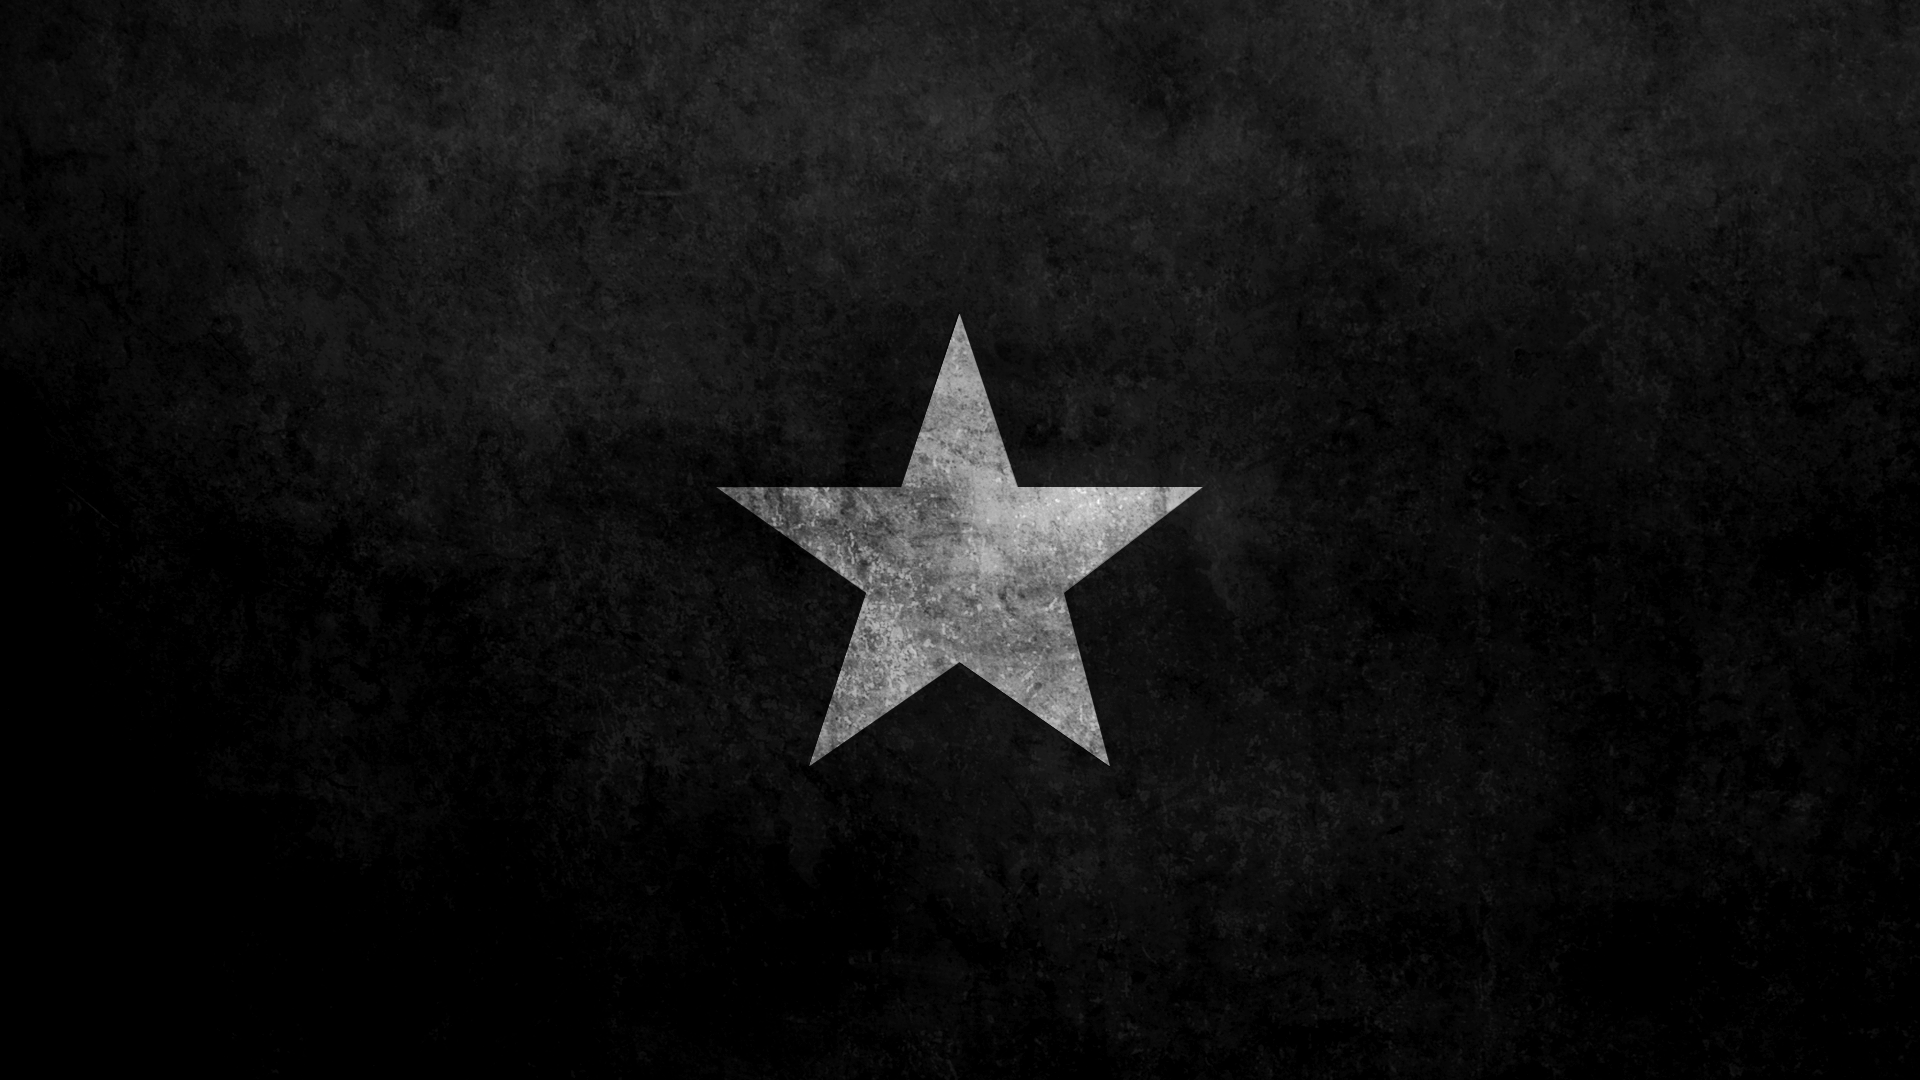 Black Star Hd Wallpapers - Top Free Black Star Hd Backgrounds